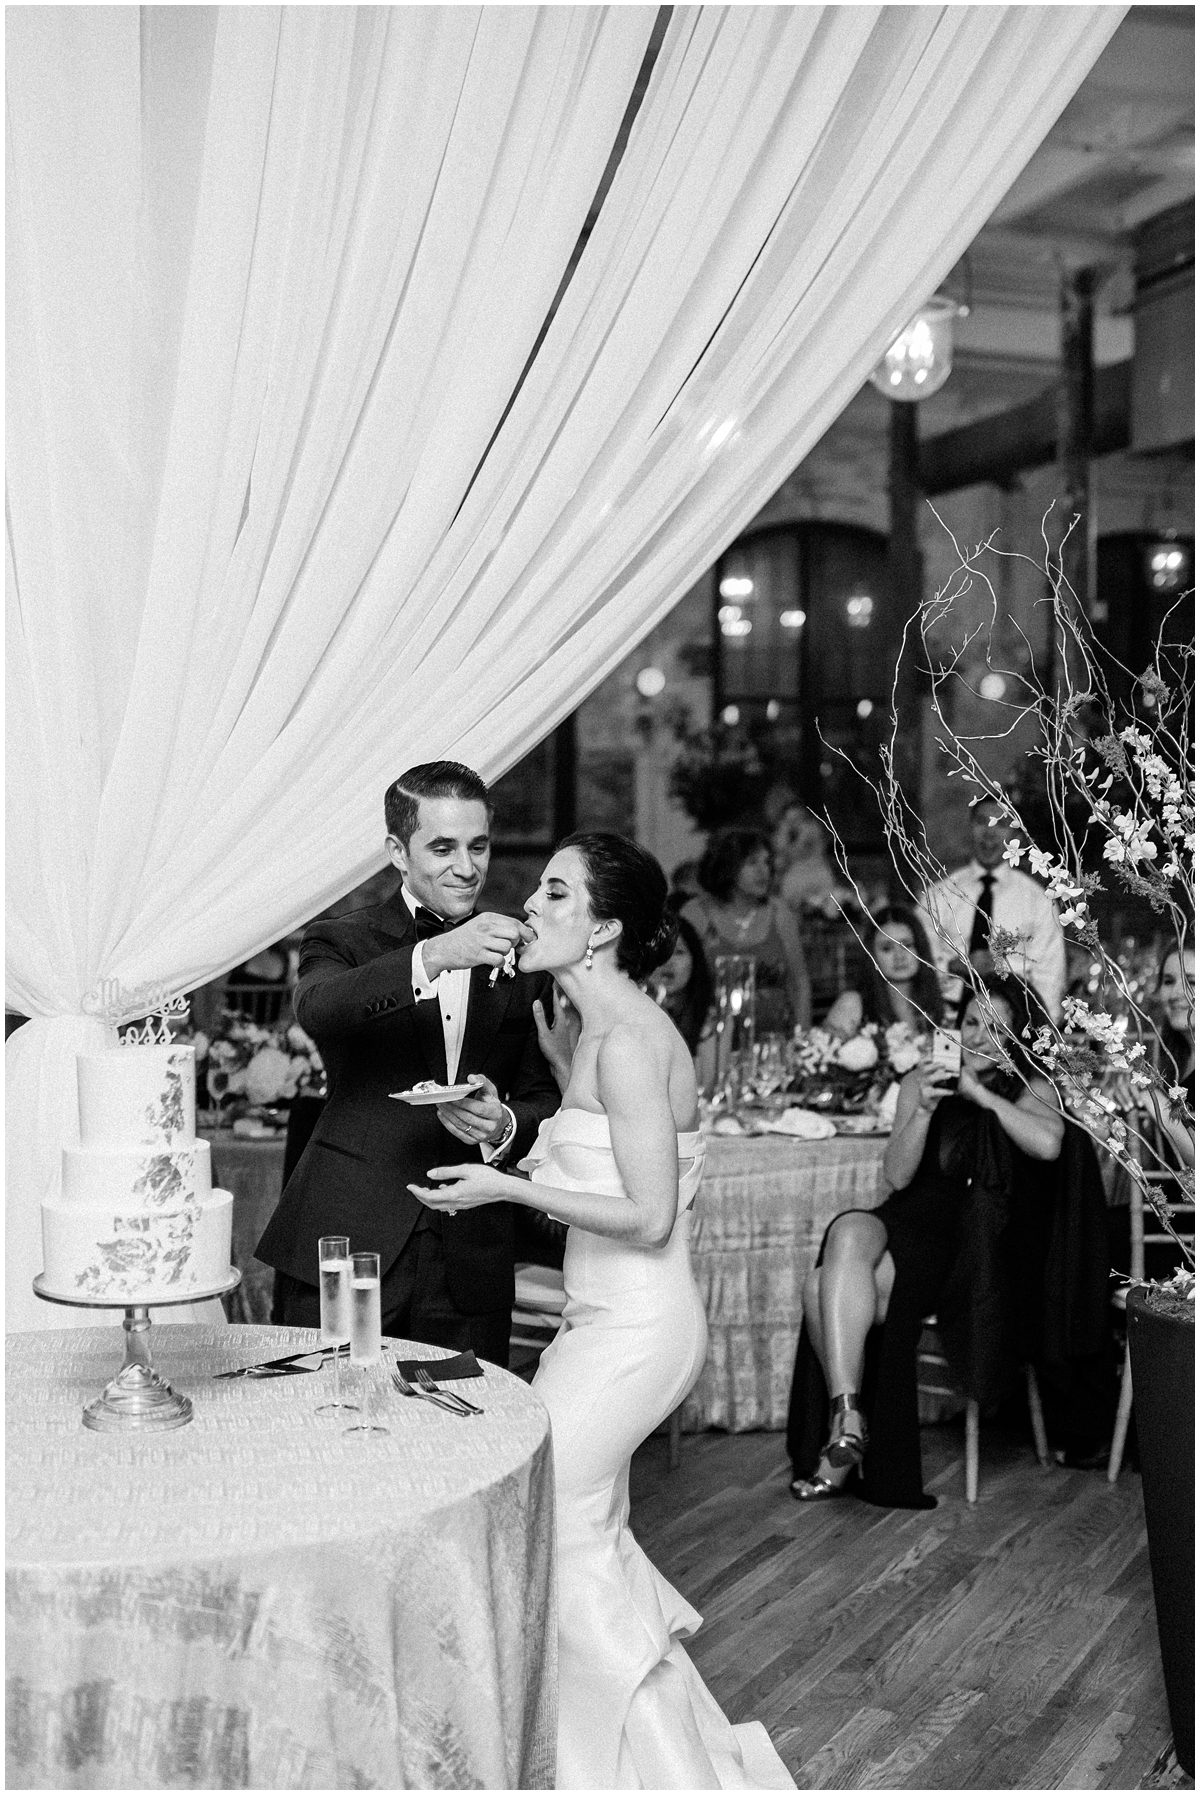 Editorial wedding photo of the Bride and groom from NYC eating cake at their Charleston SC wedding